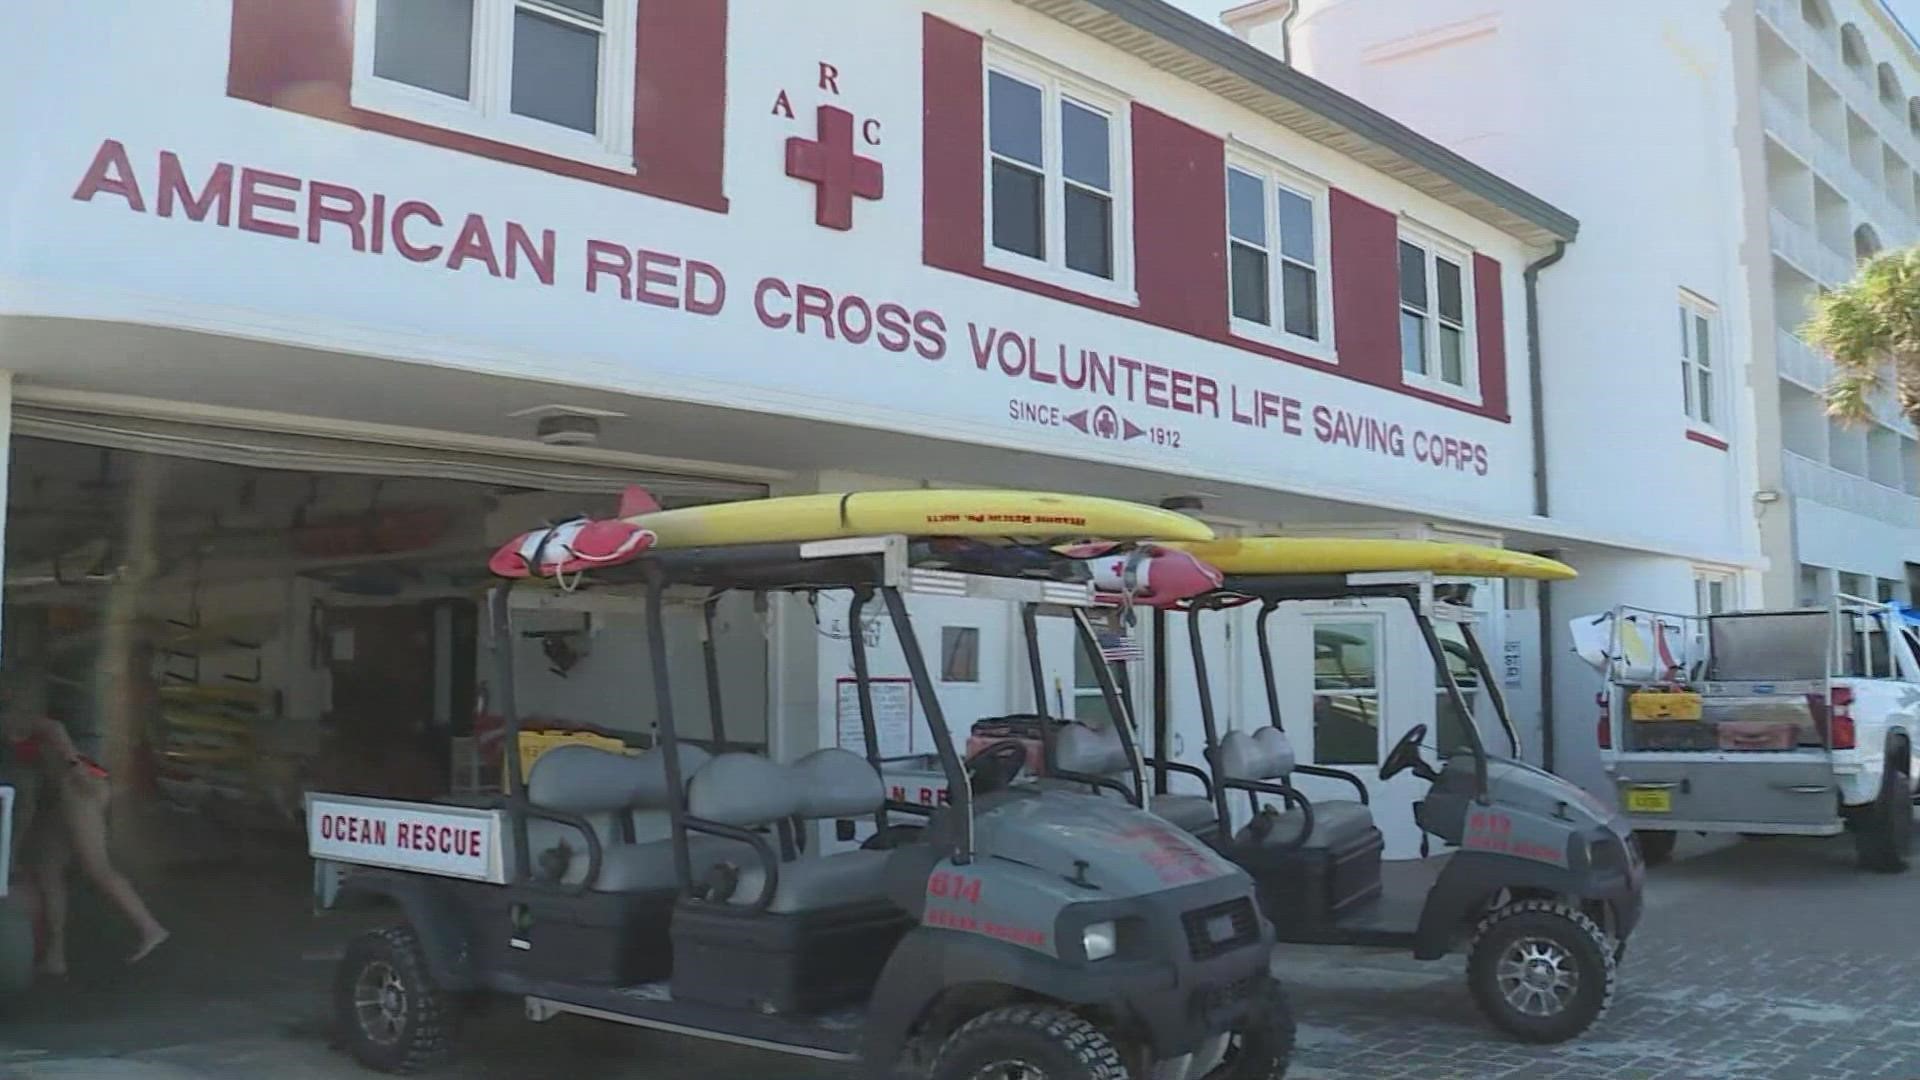 Jacksonville Beach Ocean Rescue says in June they reported a record number of calls for service.